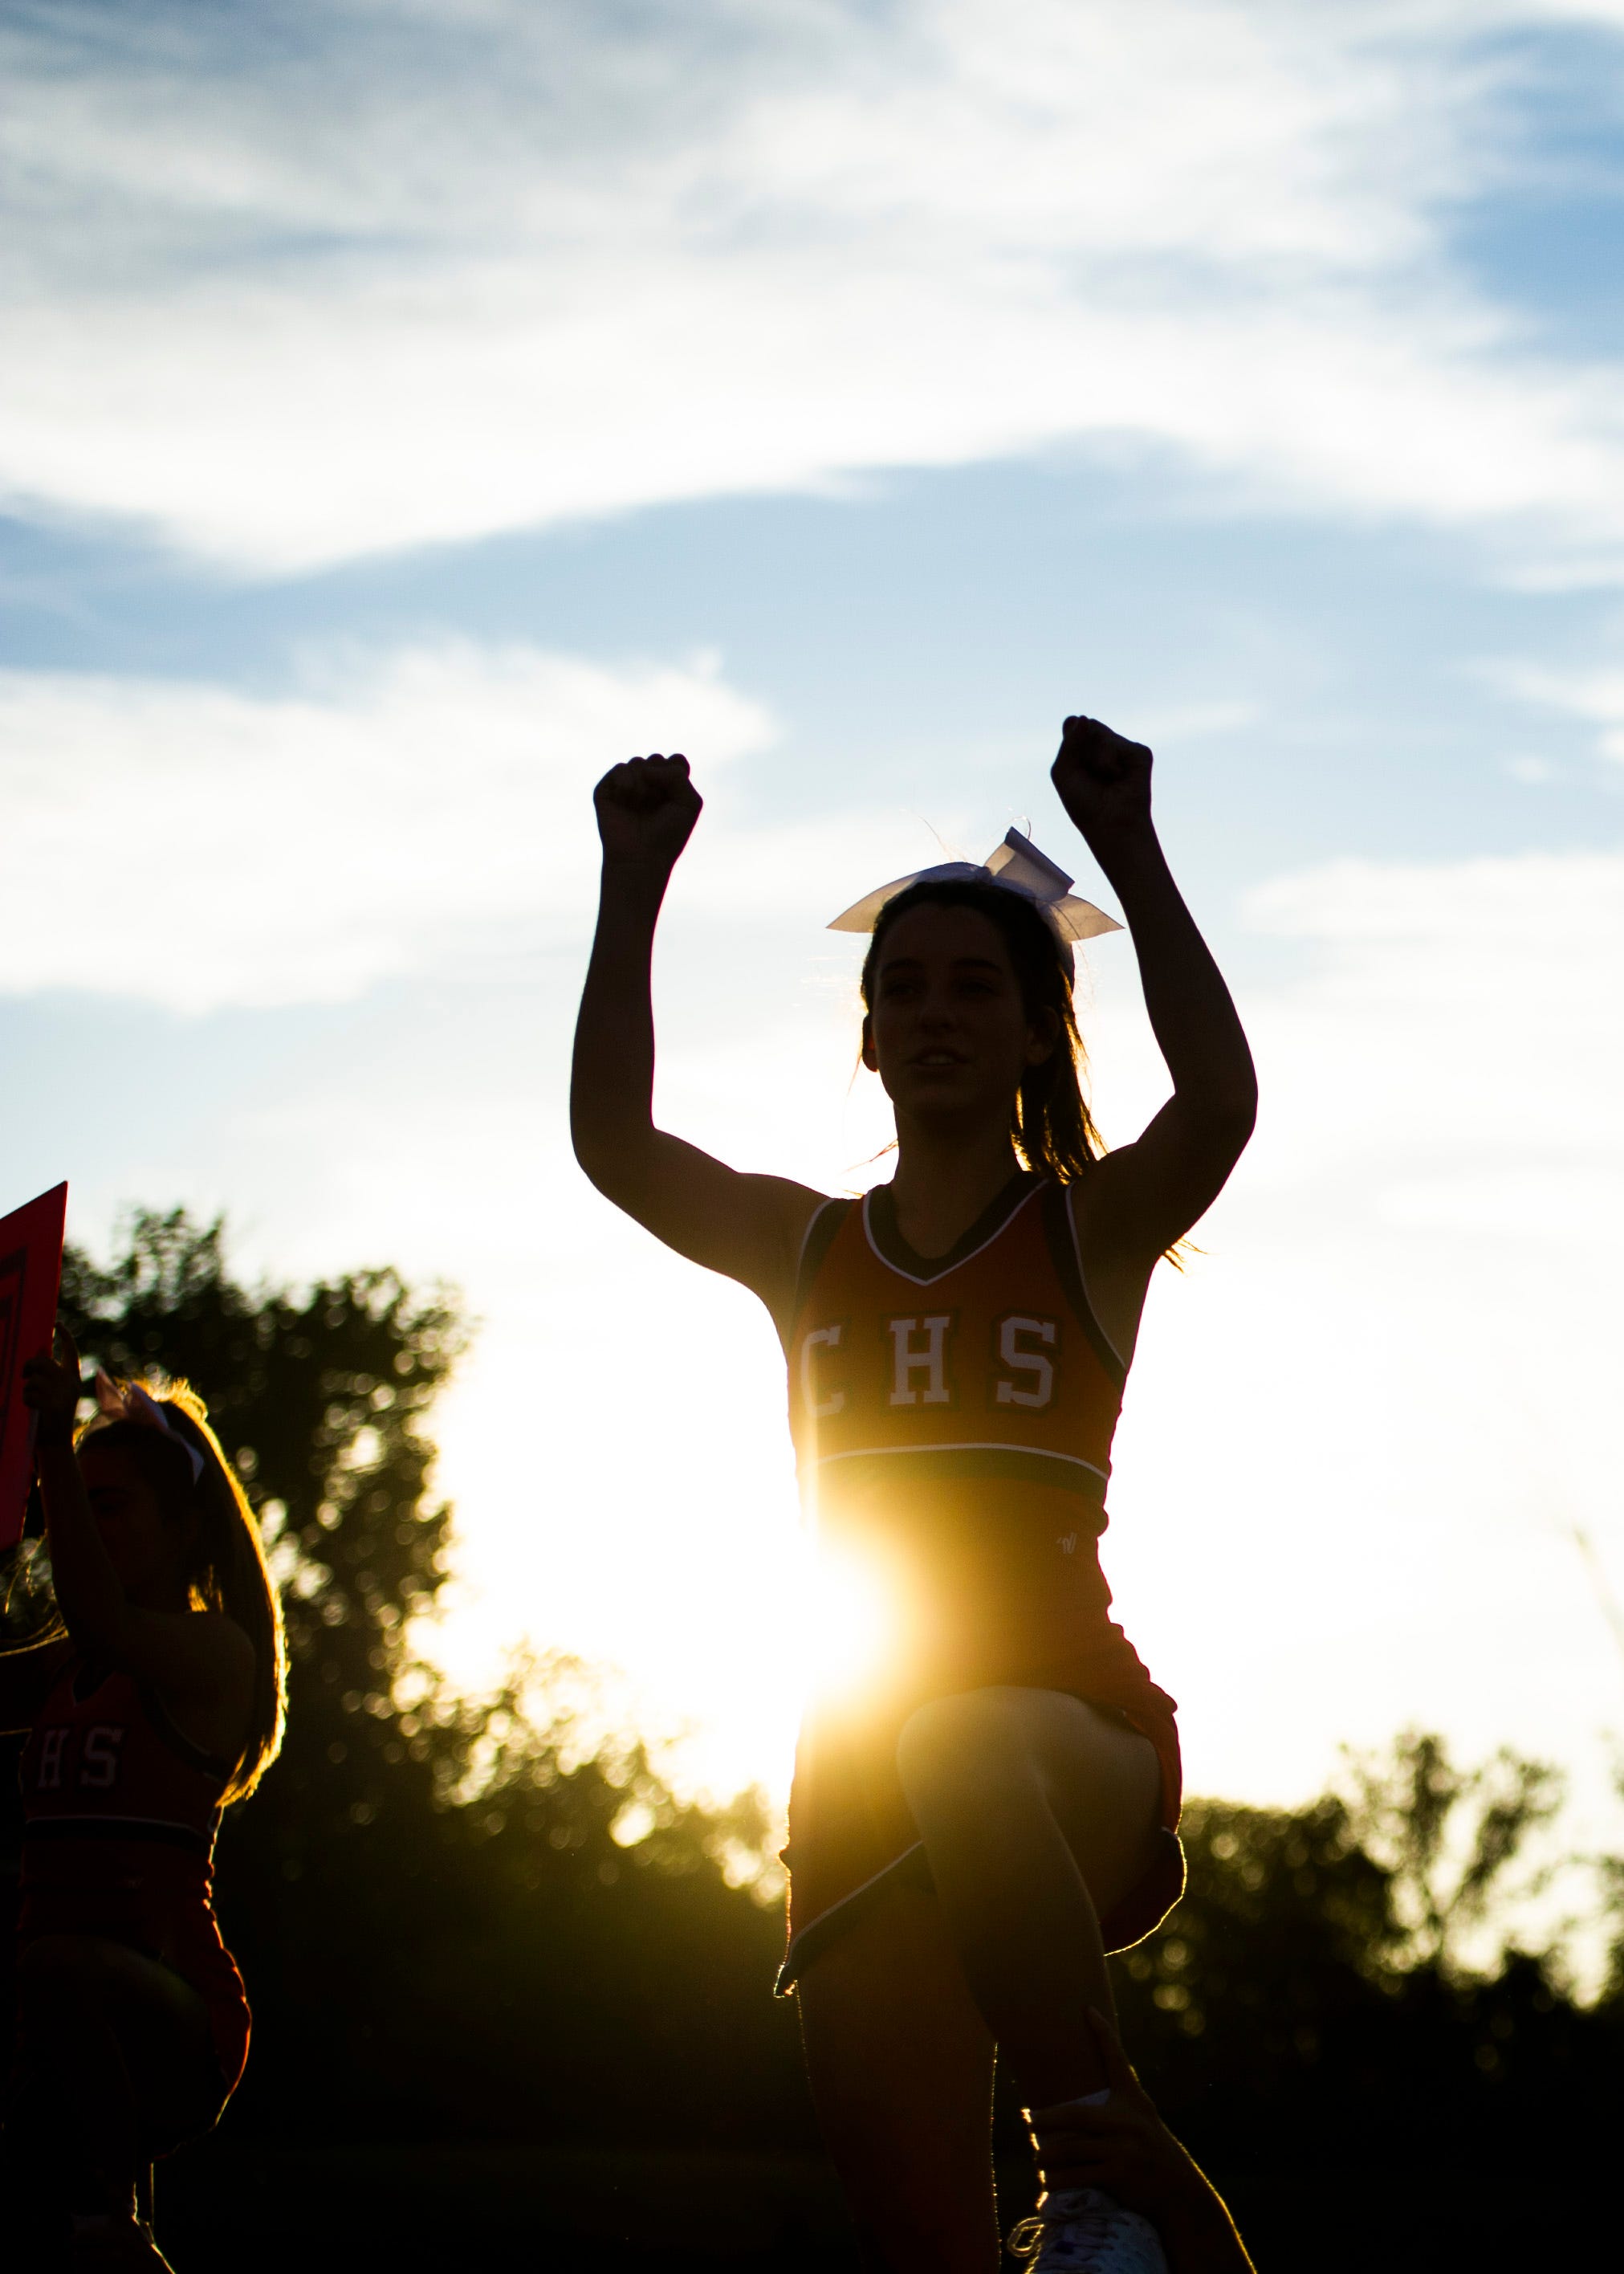 A Central cheerleader before the Halls and Central high school football game on Friday, October 4, 2019 at Halls High School.